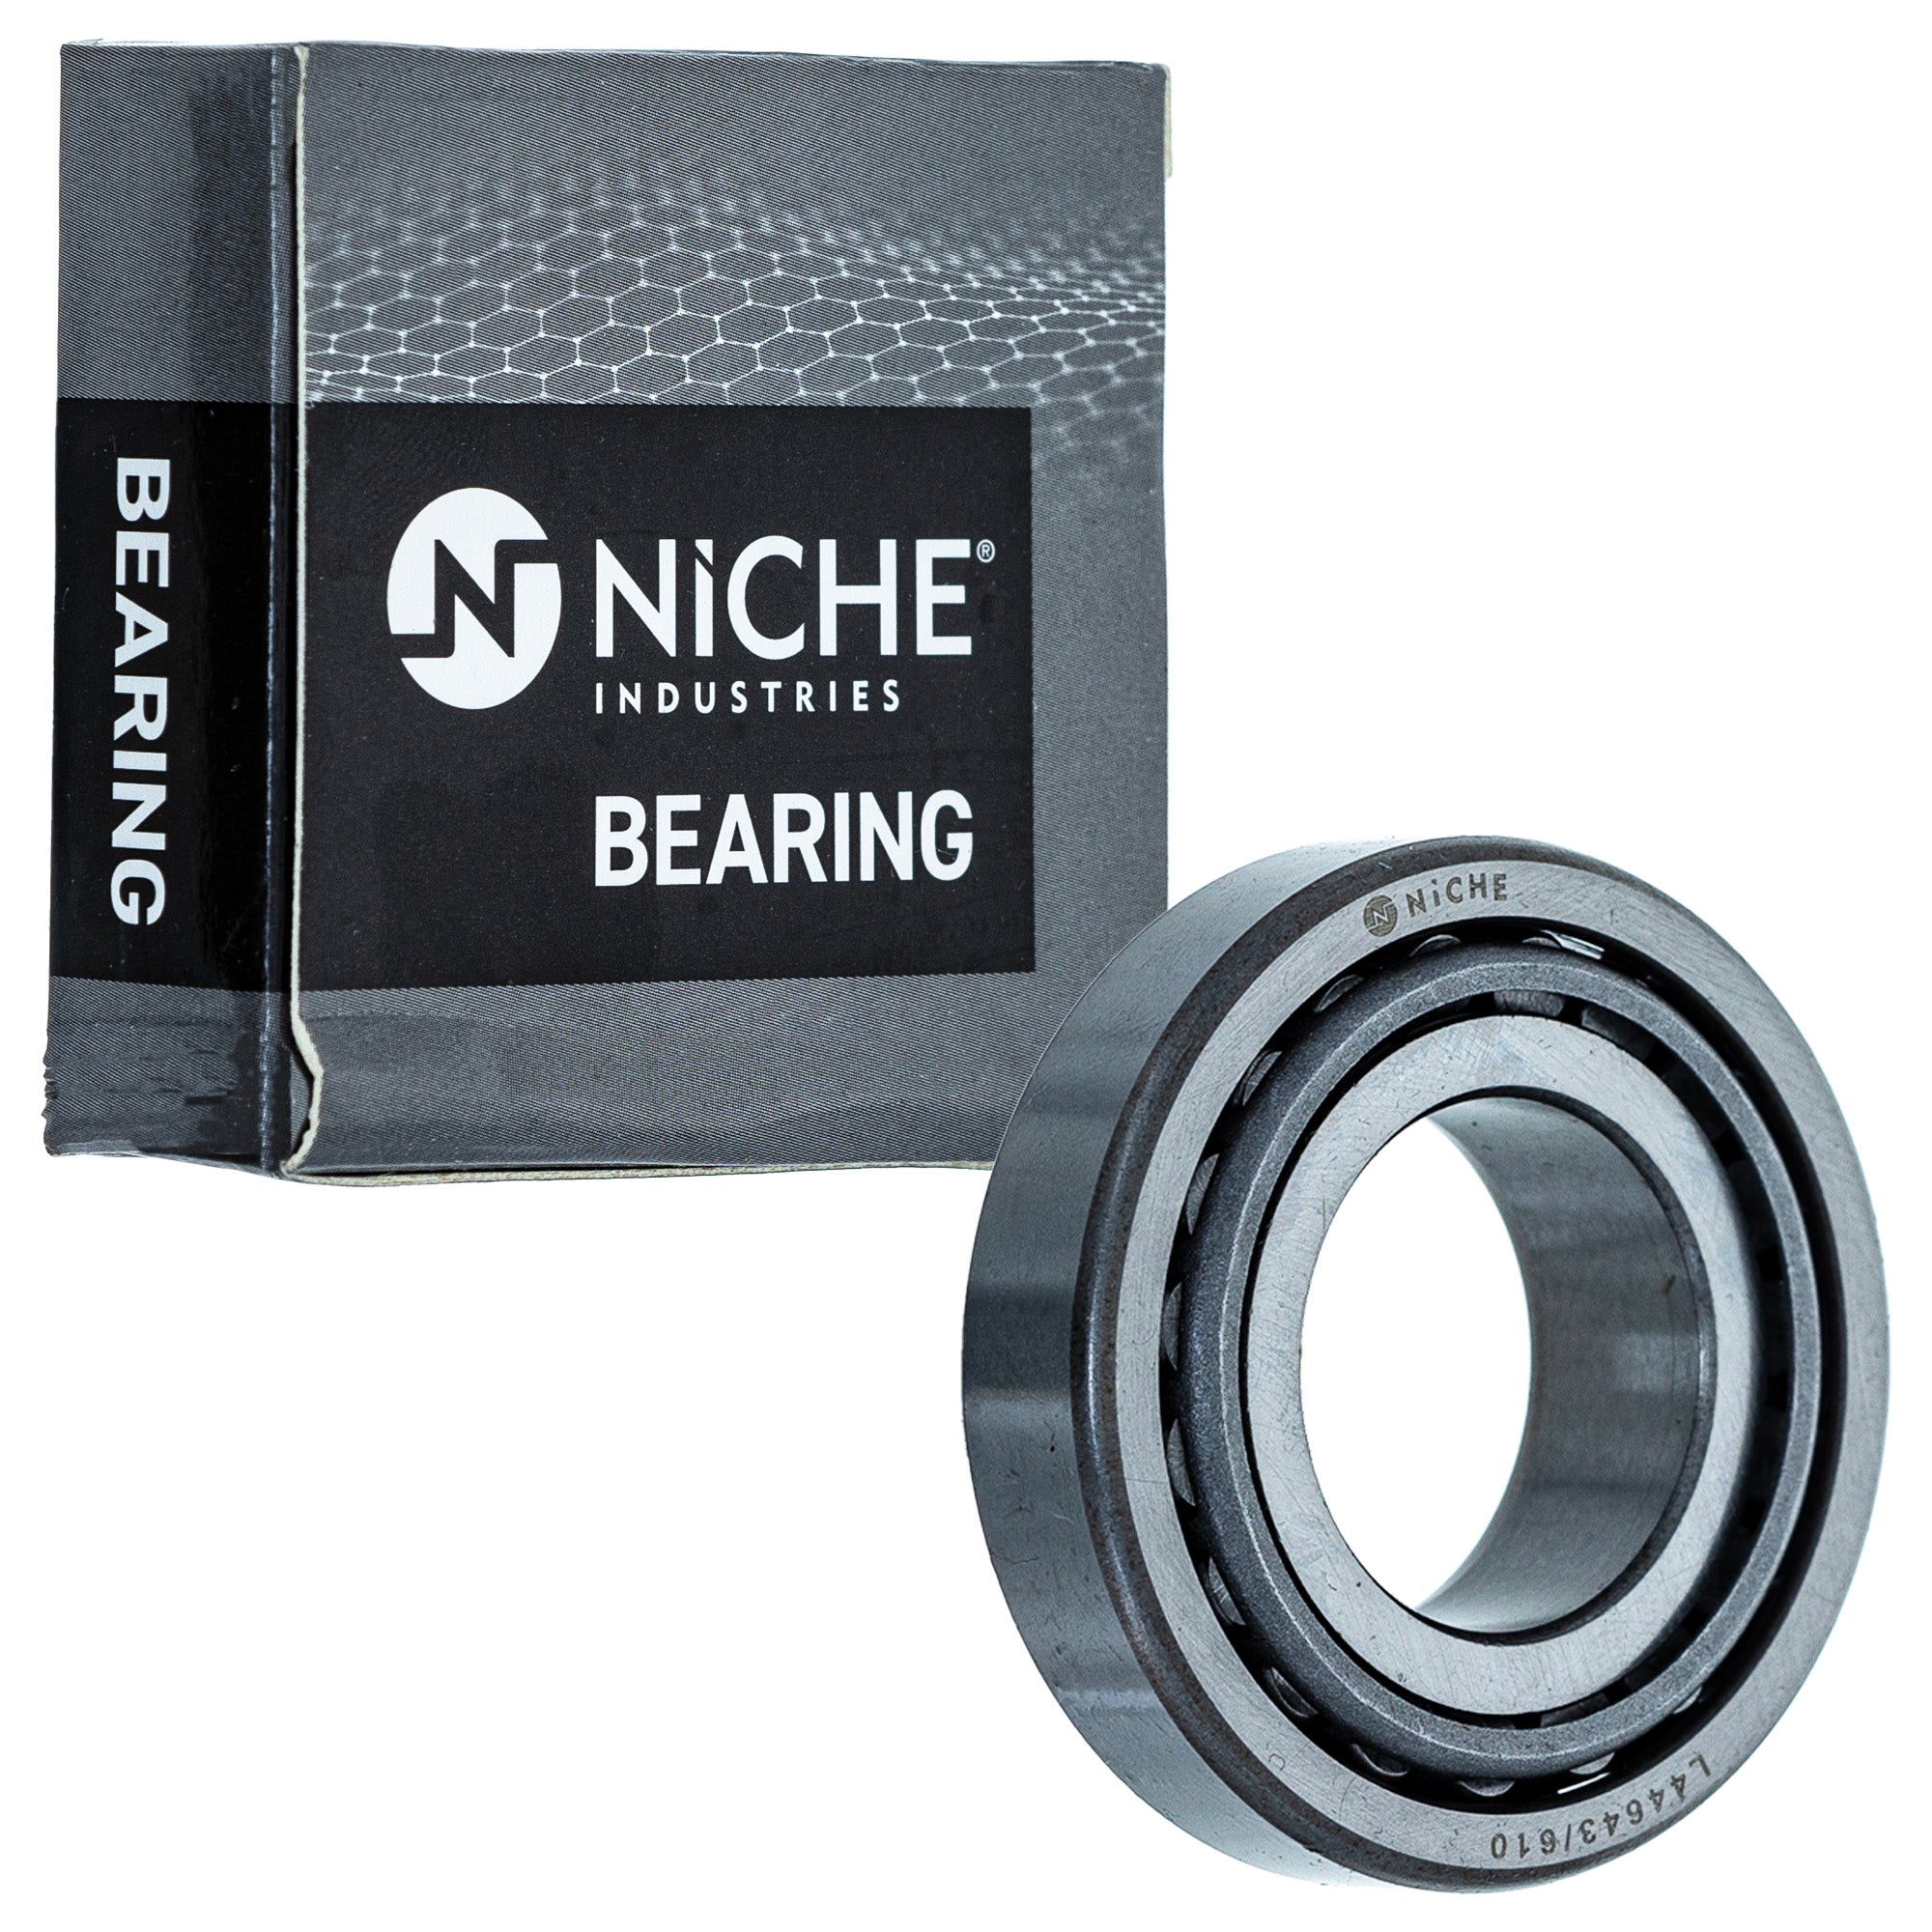 NICHE 519-CBB2240R Bearing 10-Pack for zOTHER Xplorer Xpedition